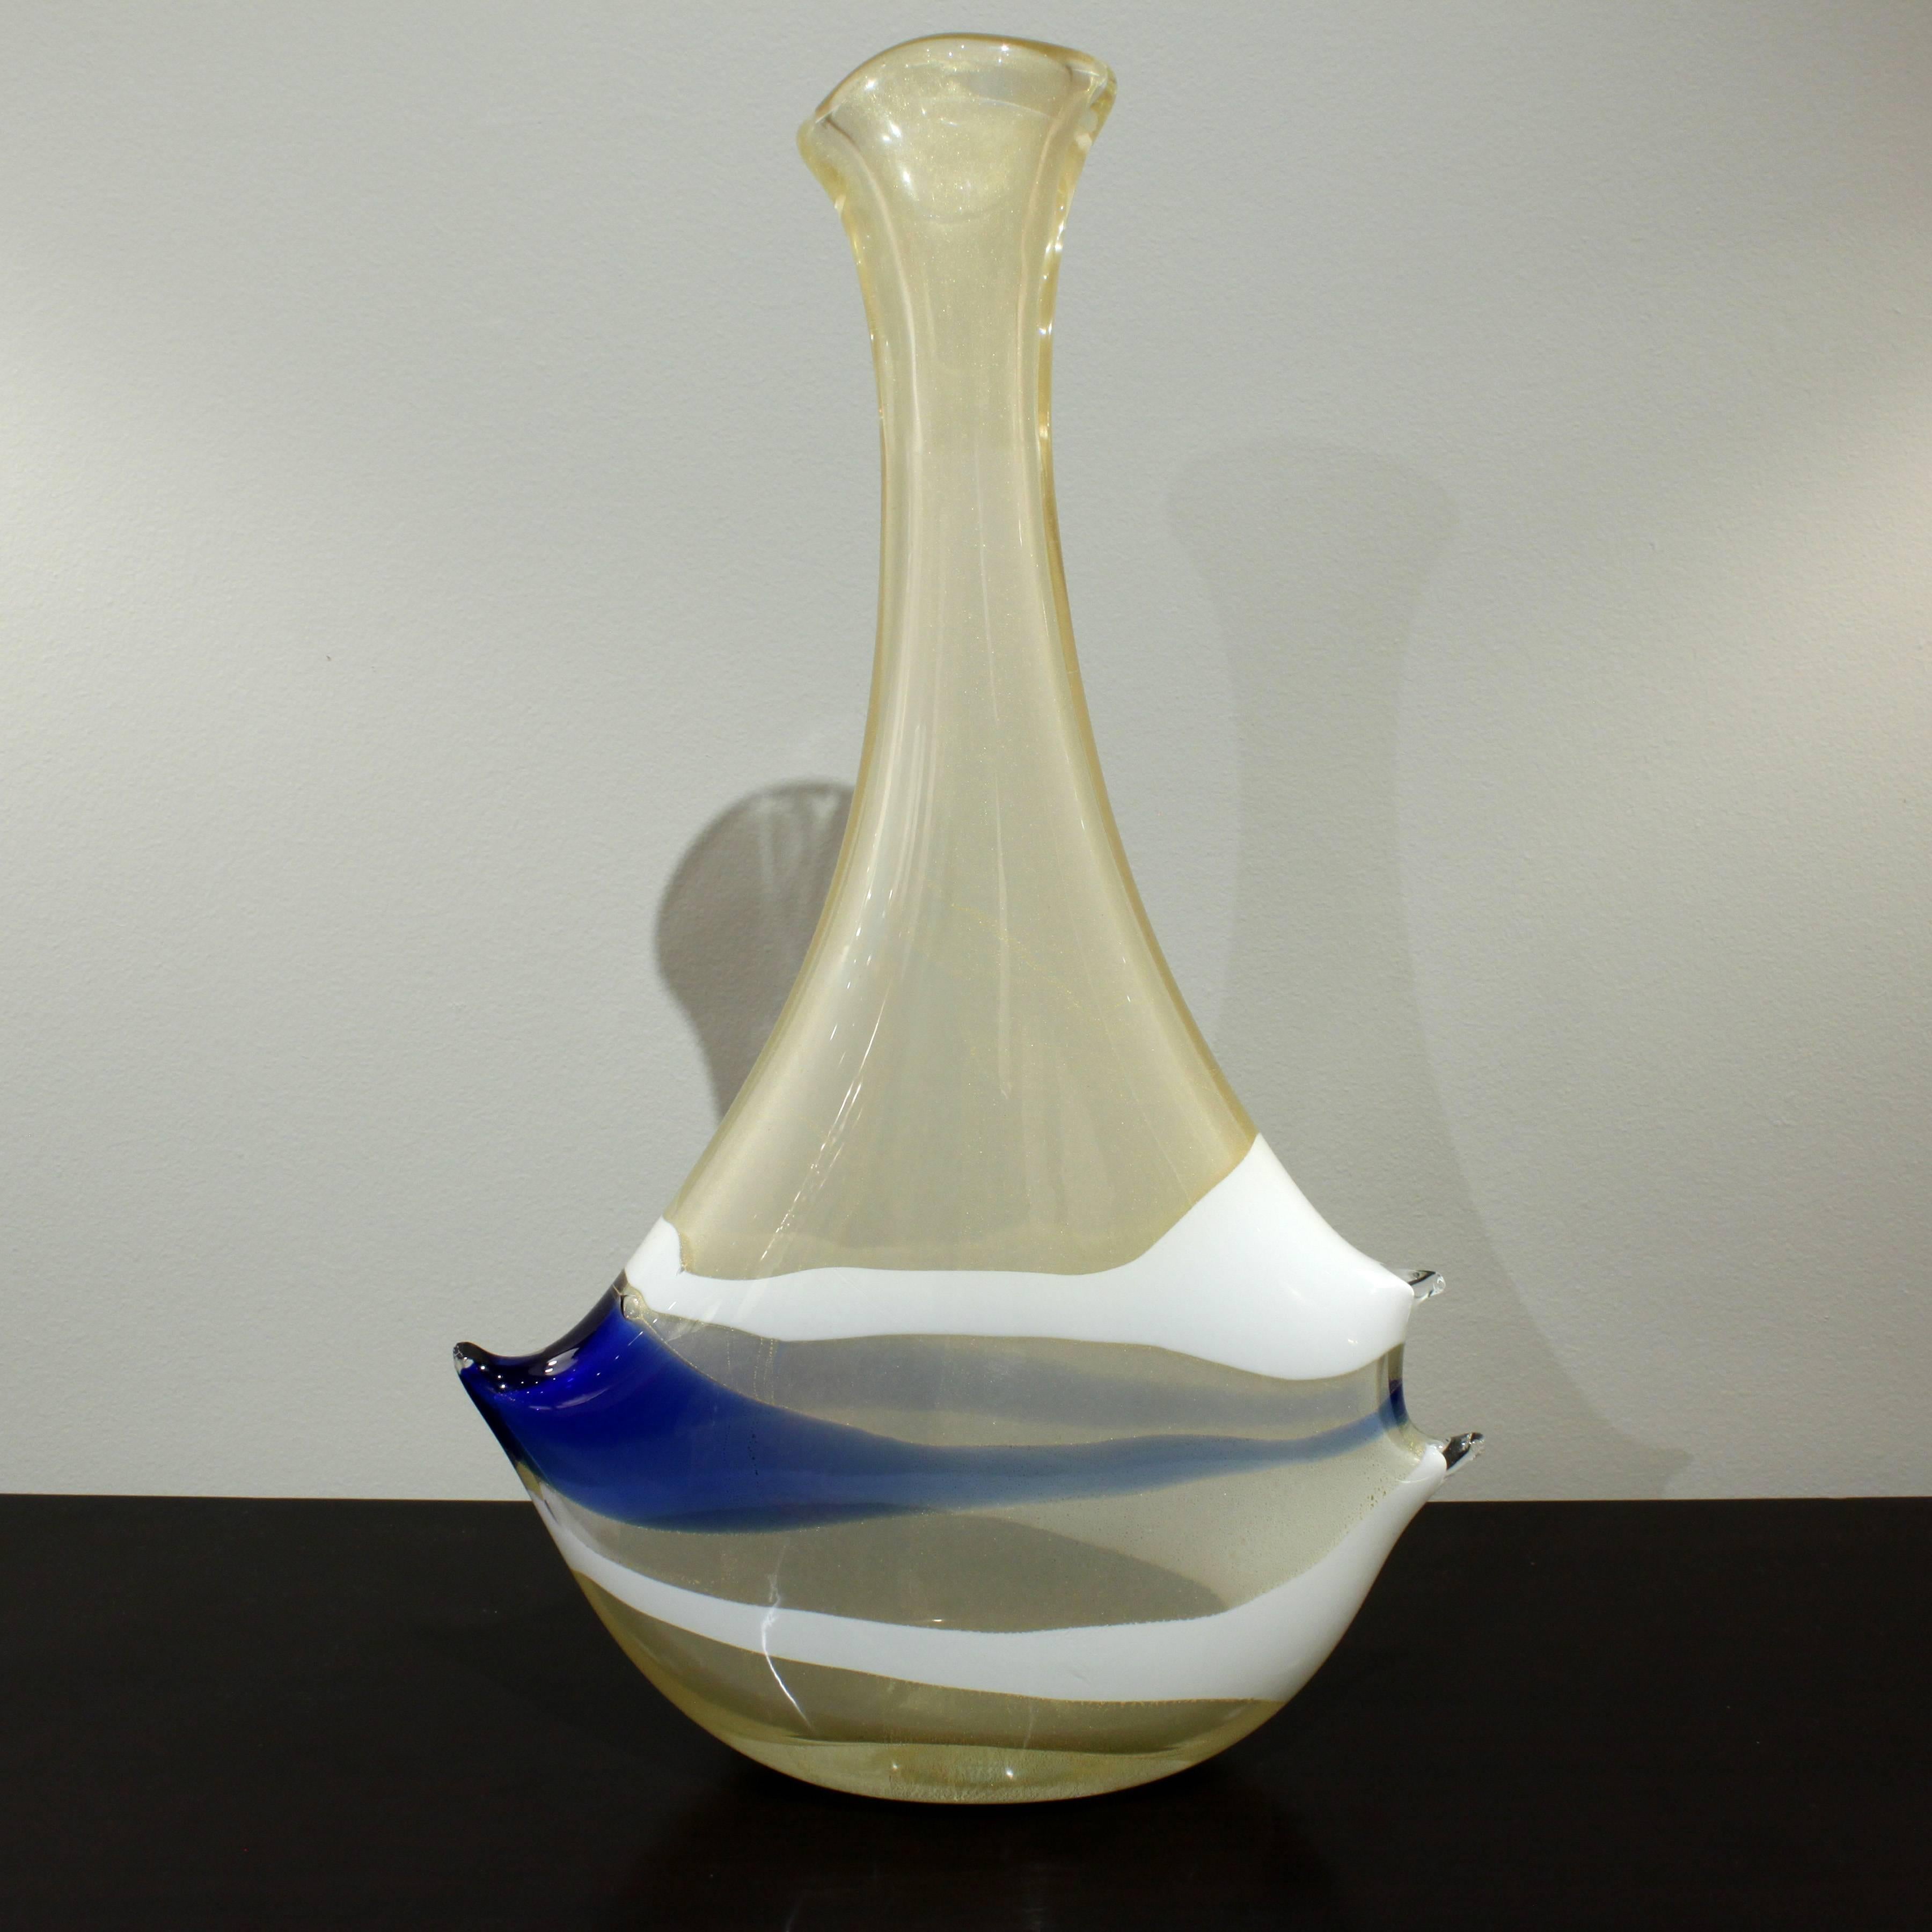 Exceptional hand-blown glass 